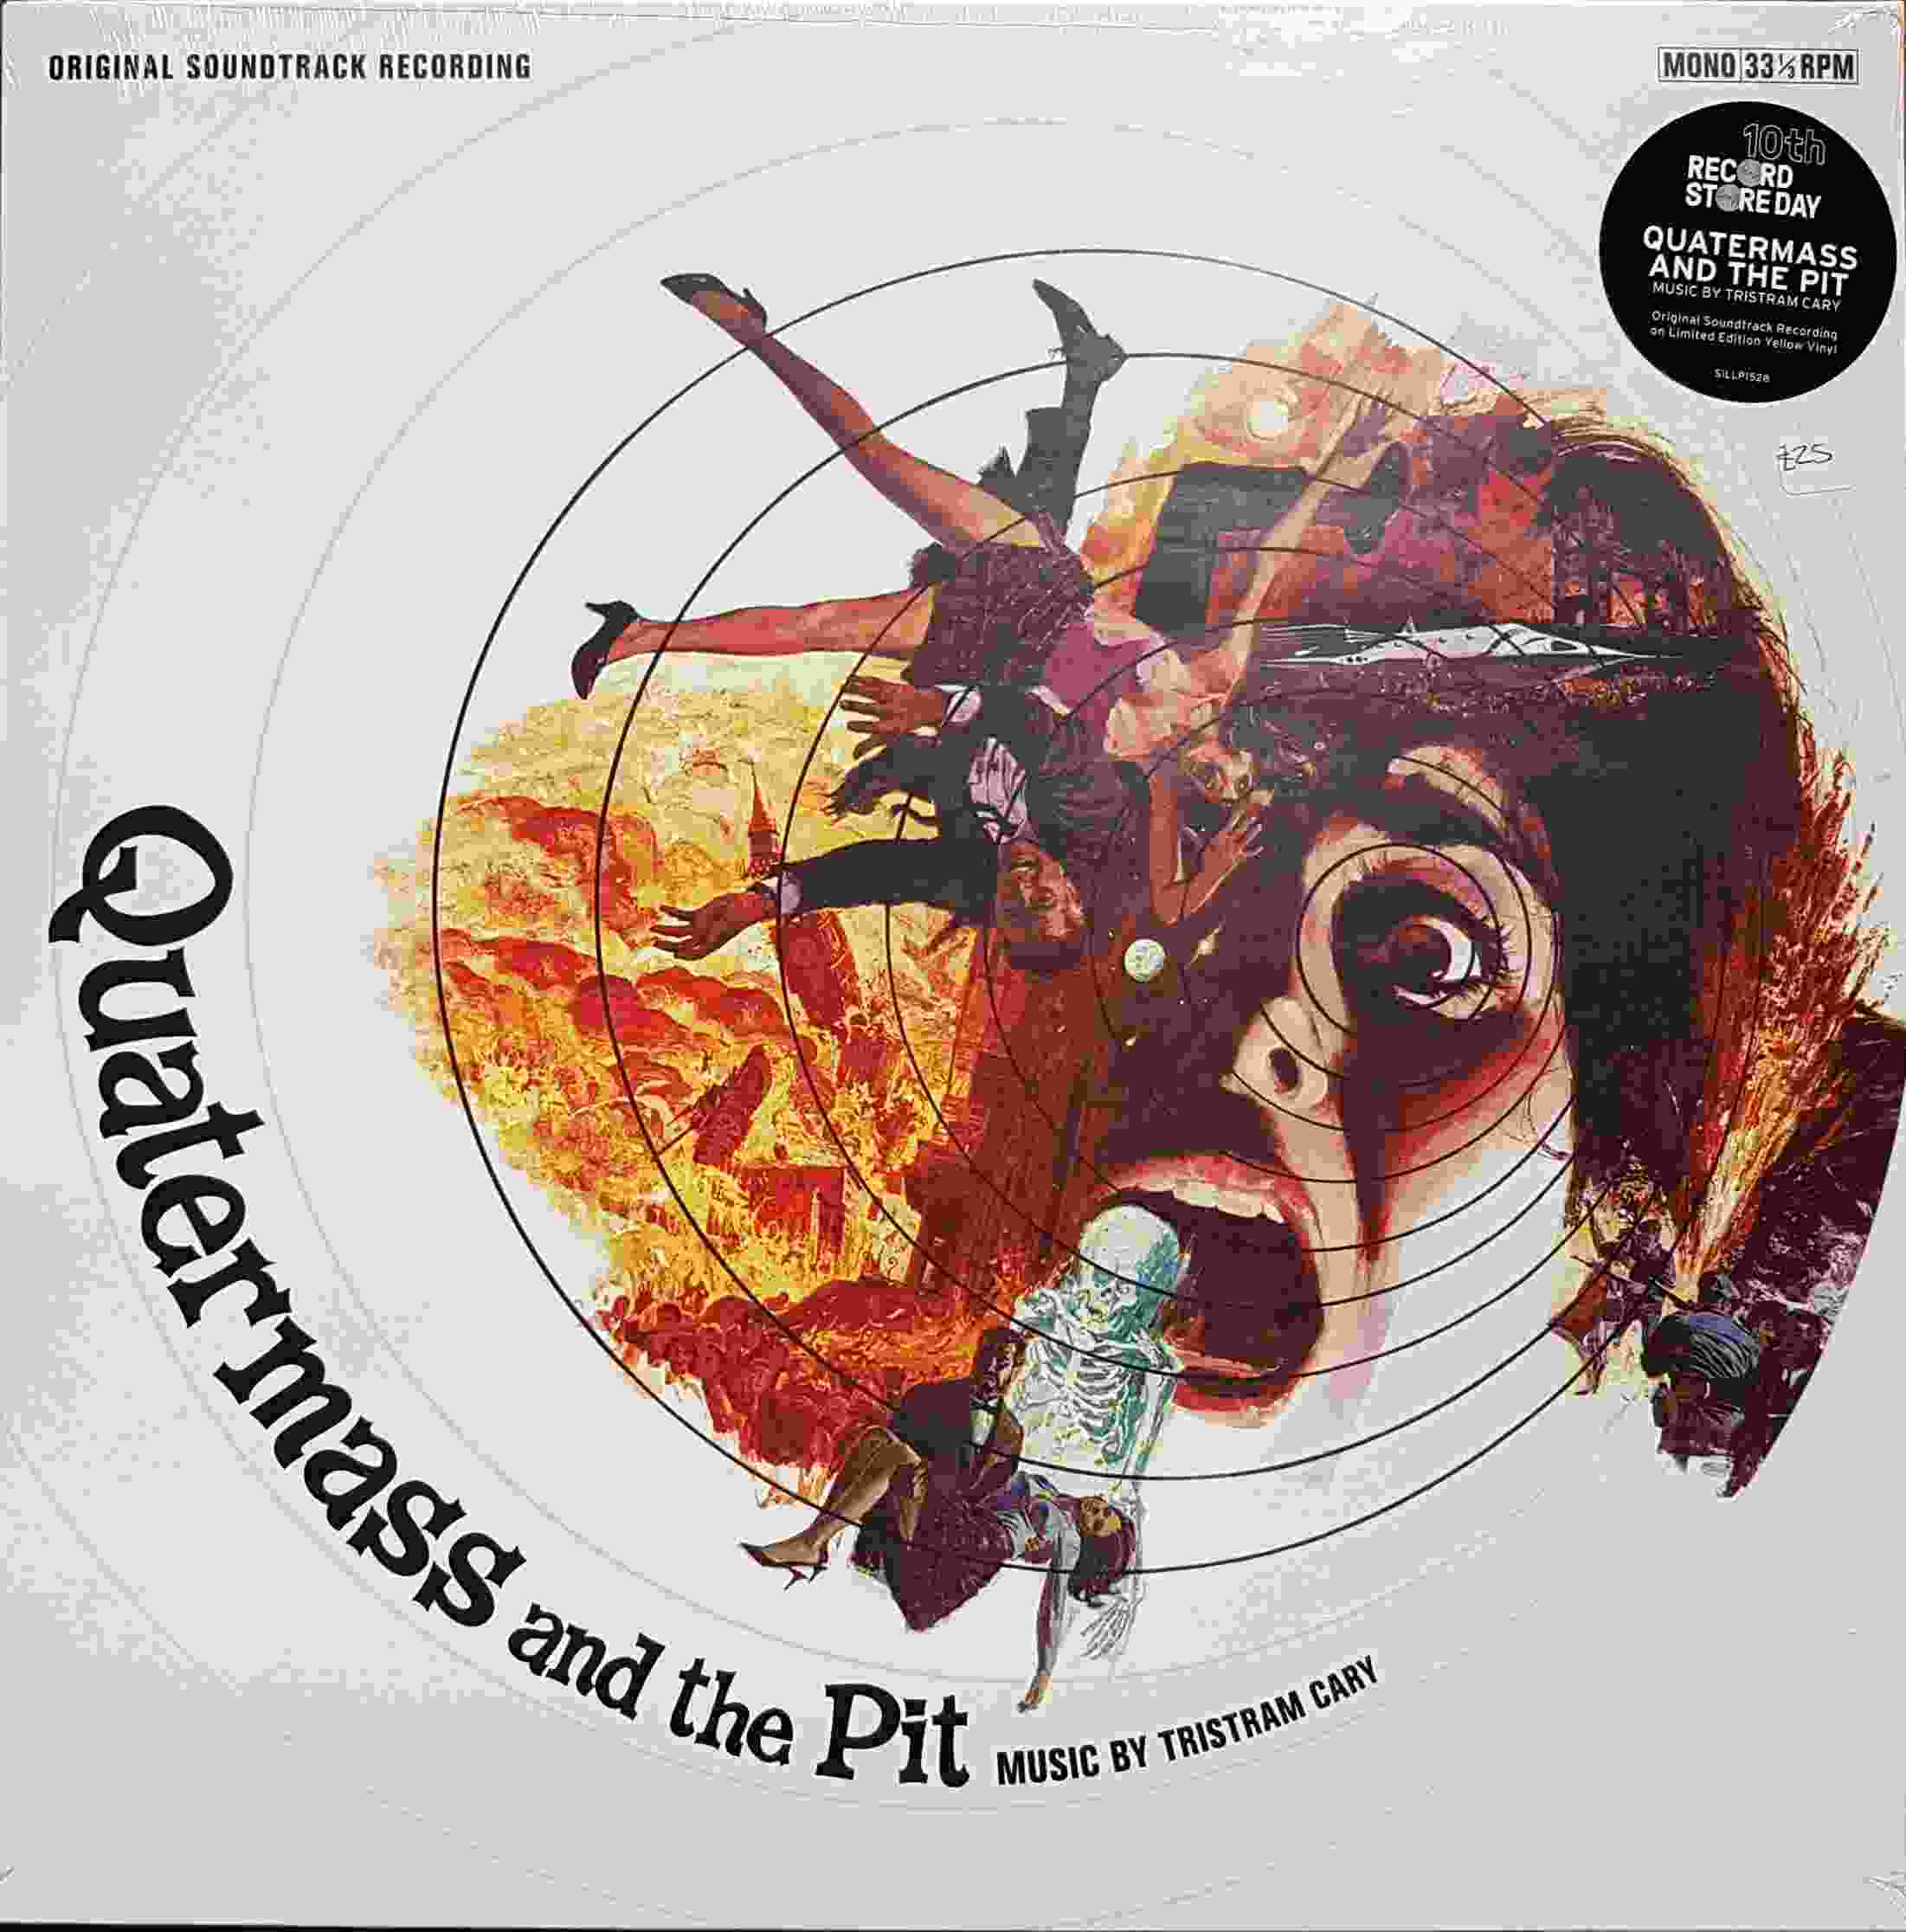 Picture of SILLP 1528 Quatermass and the pit - Record Store Day 2017 by artist Tristram Cary from the BBC records and Tapes library